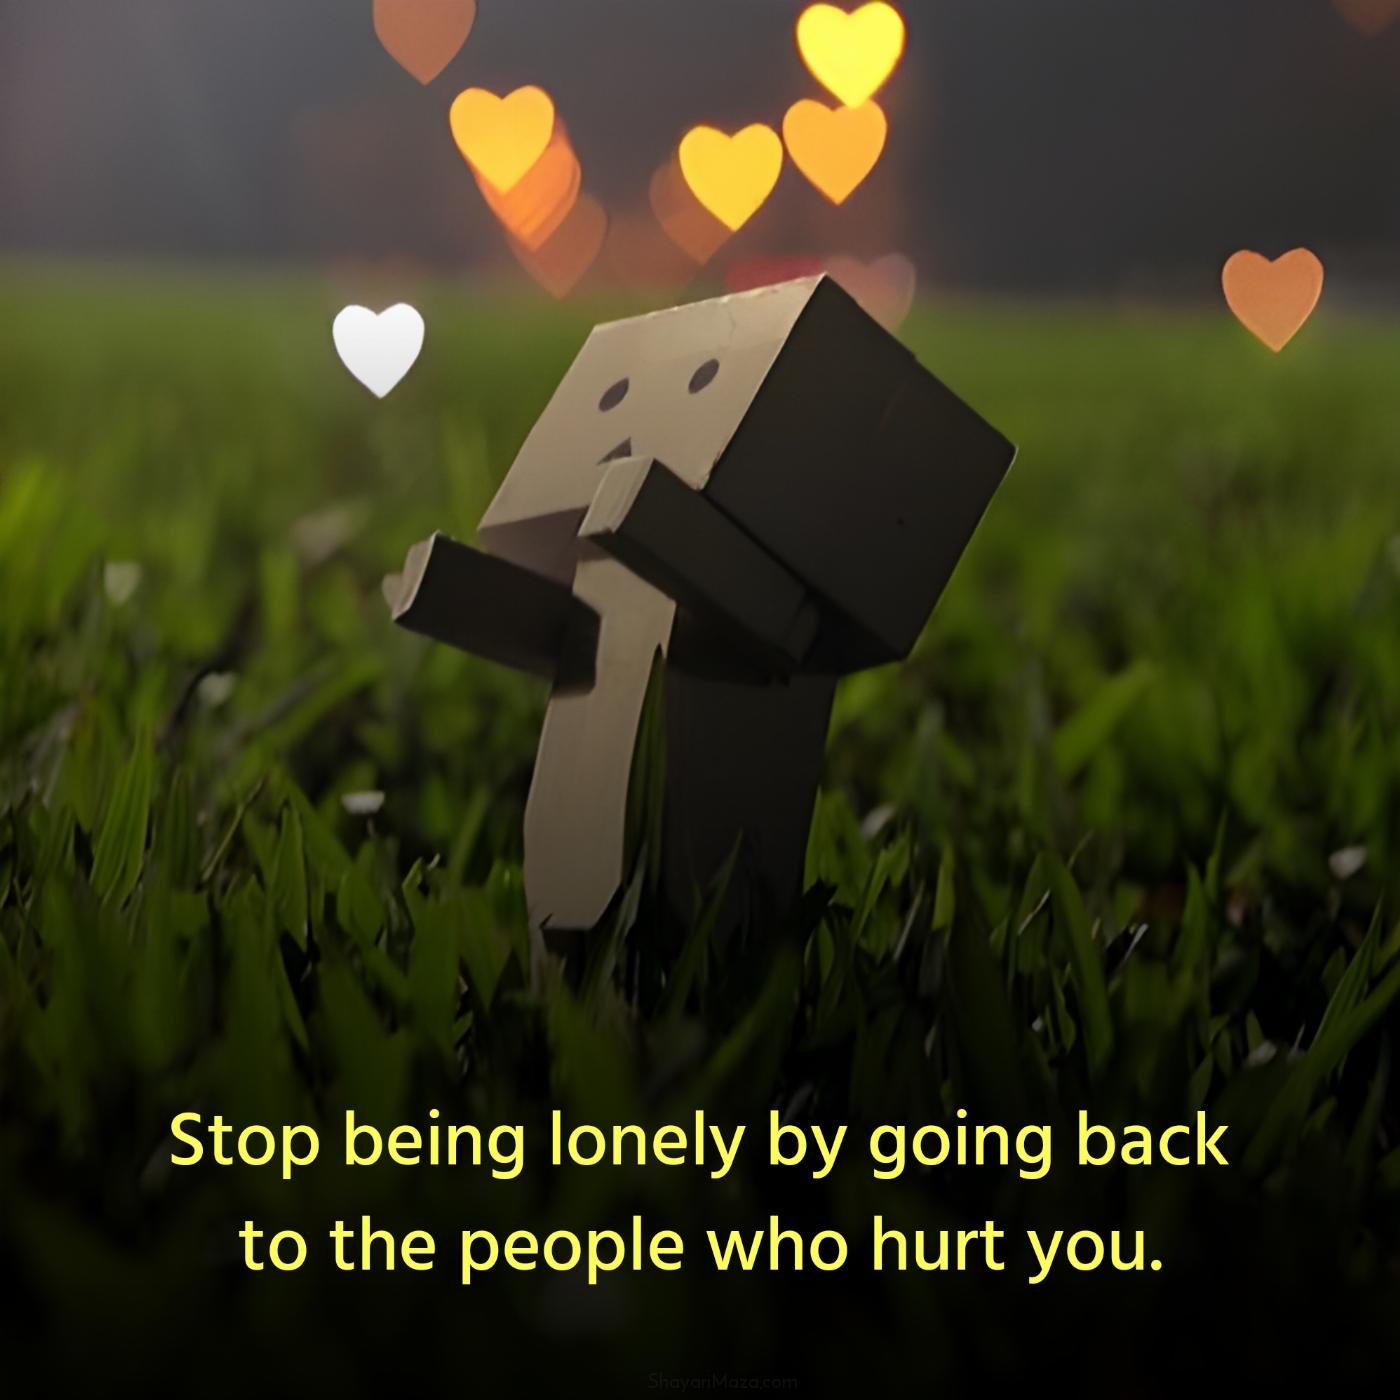 Stop being lonely by going back to the people who hurt you